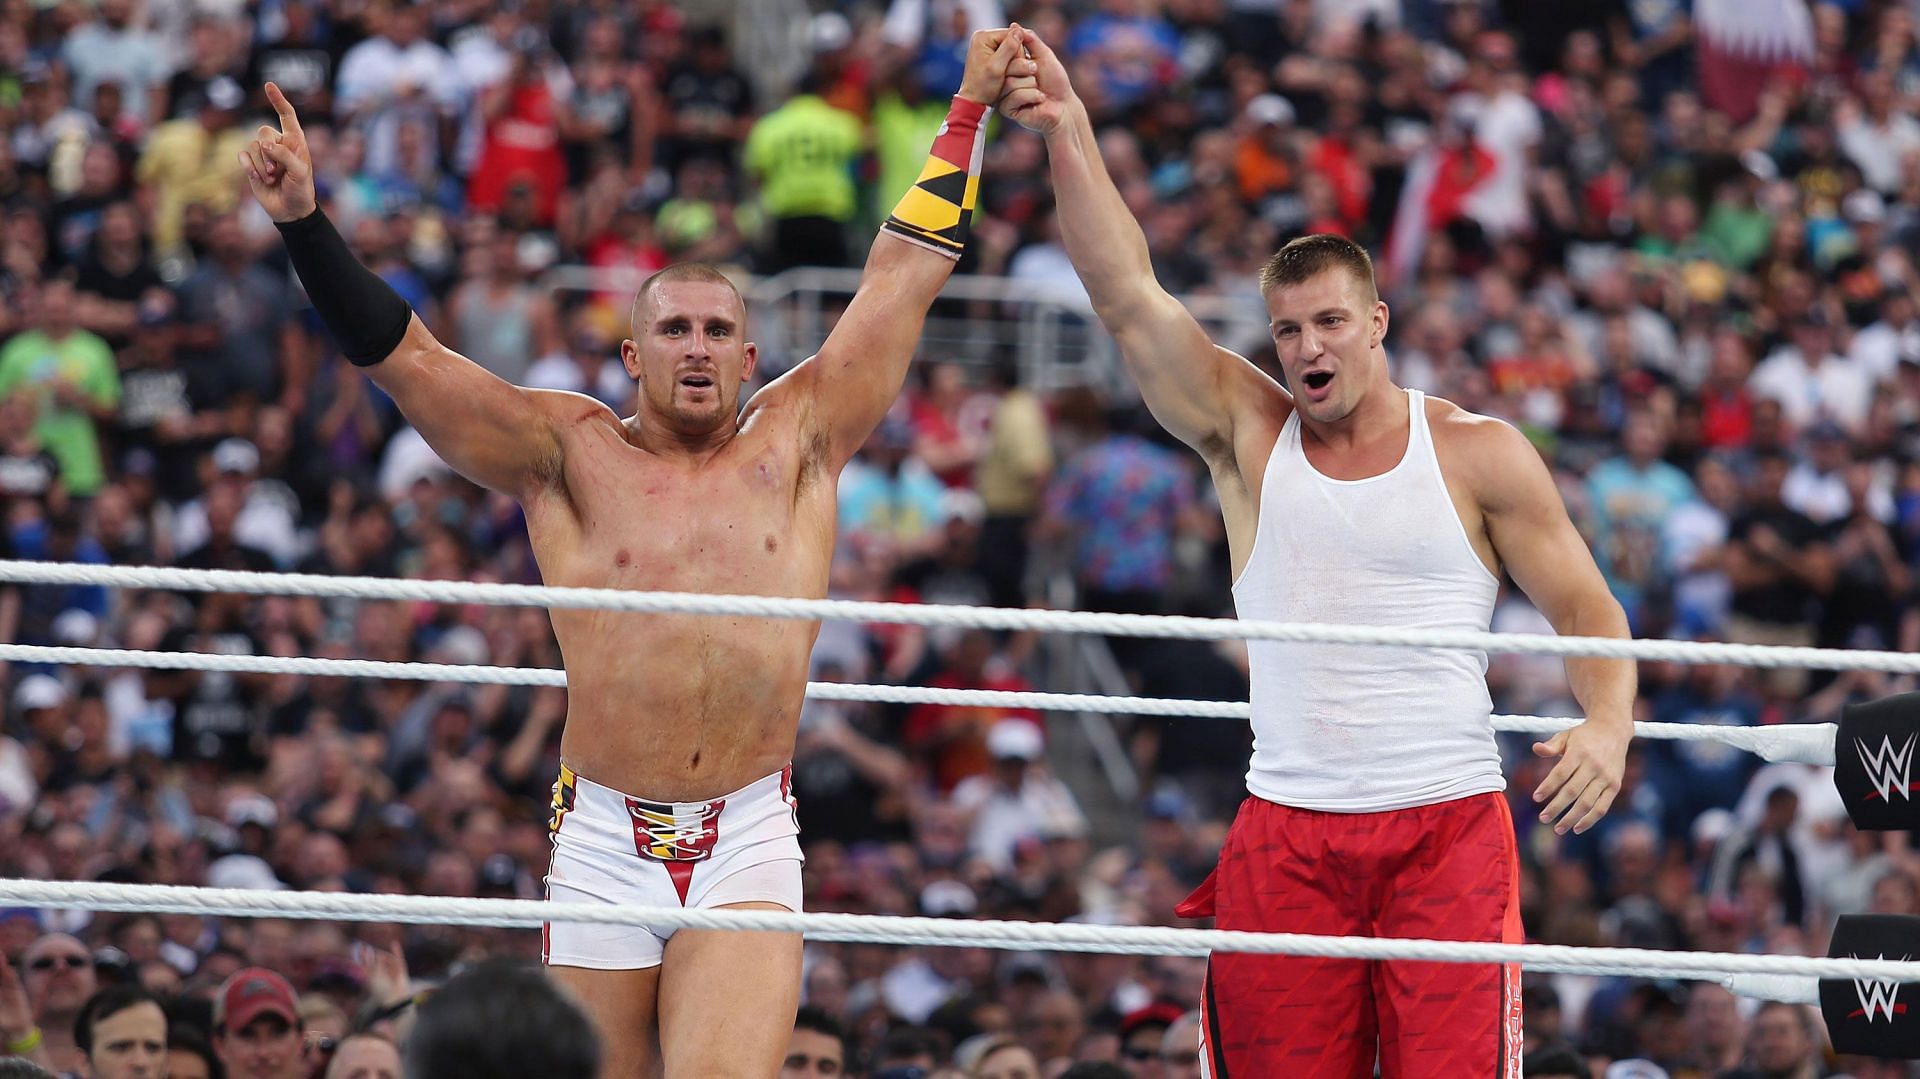 Mojo Rawley won the match with help of his friend, Rob Gronkowski